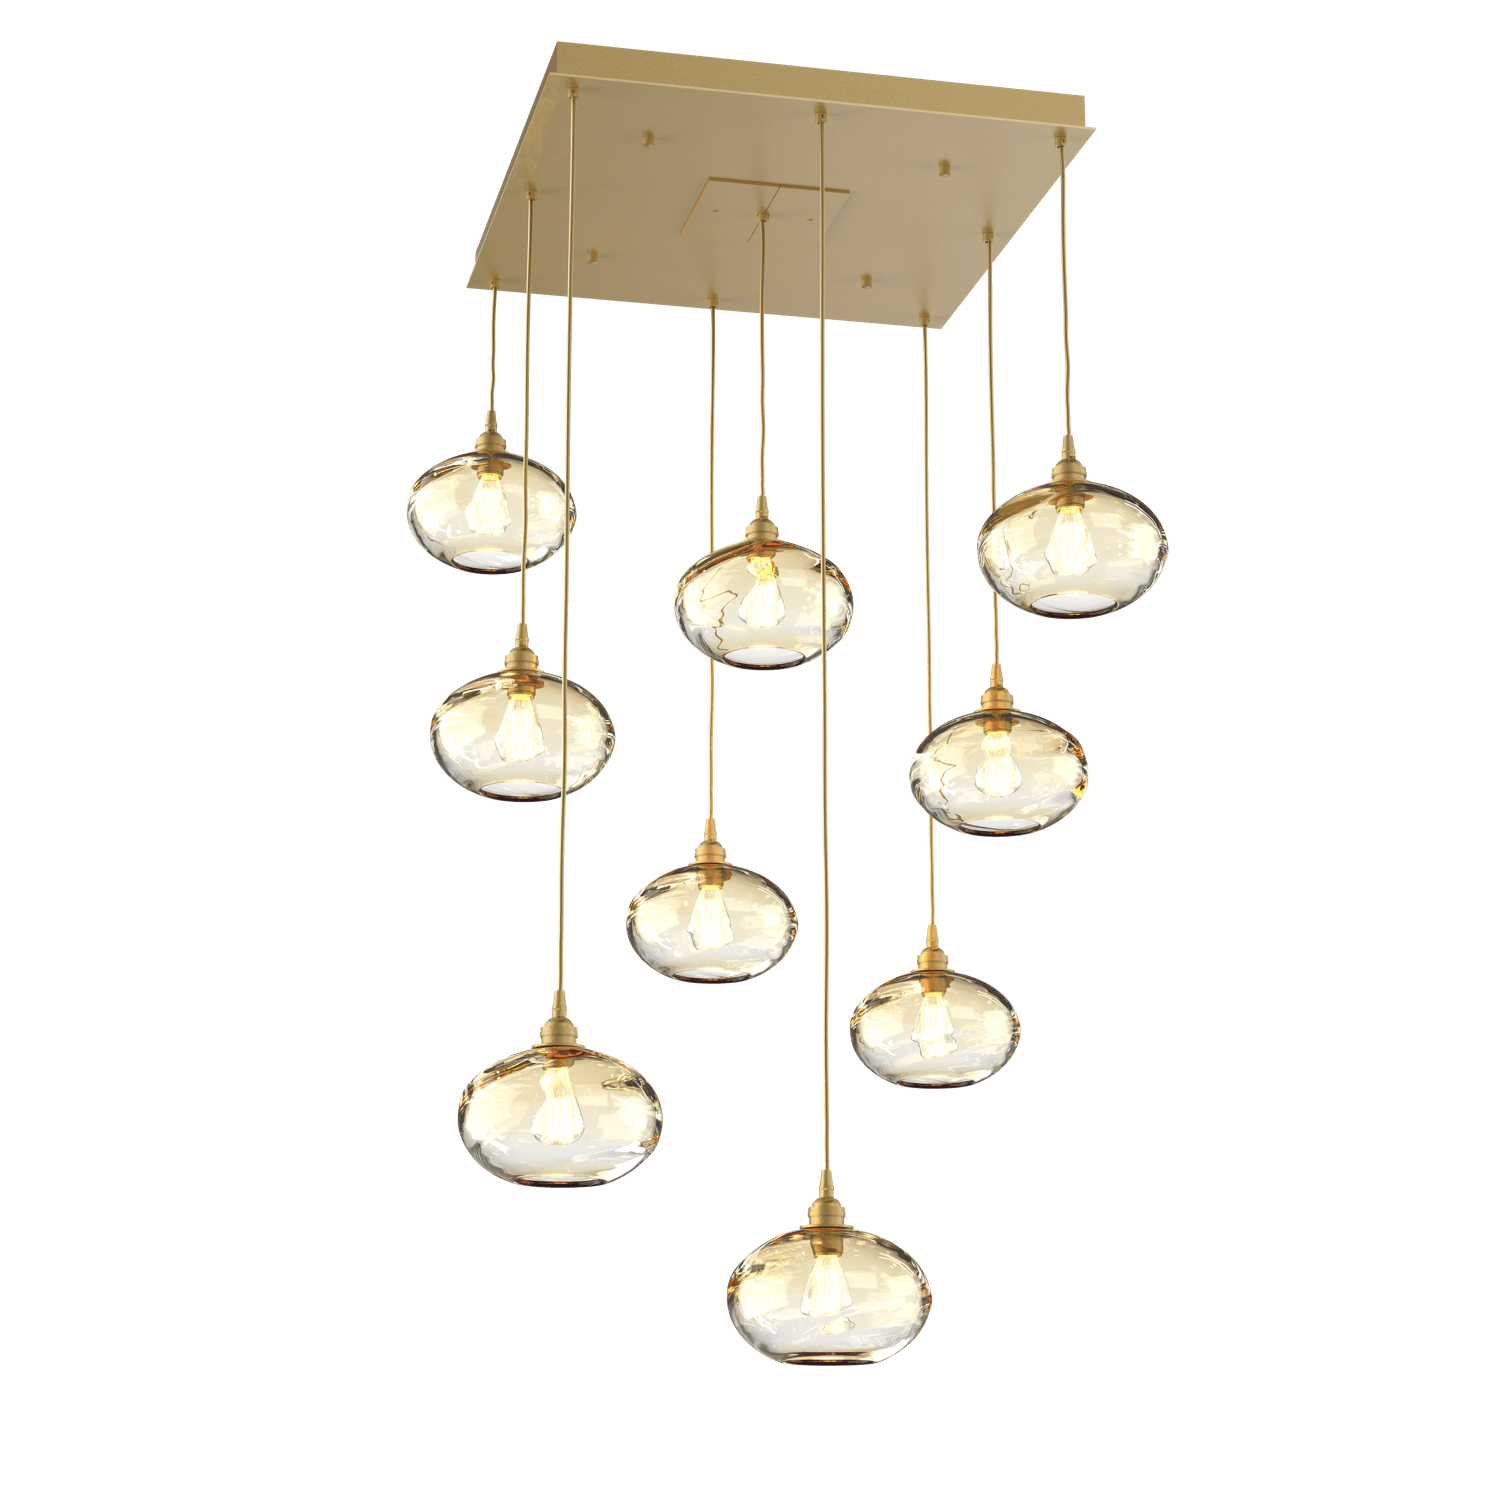 CHB0036-09-GB-OA-Hammerton-Studio-Optic-Blown-Glass-Coppa-9-light-square-pendant-chandelier-with-gilded-brass-finish-and-optic-amber-blown-glass-shades-and-incandescent-lamping